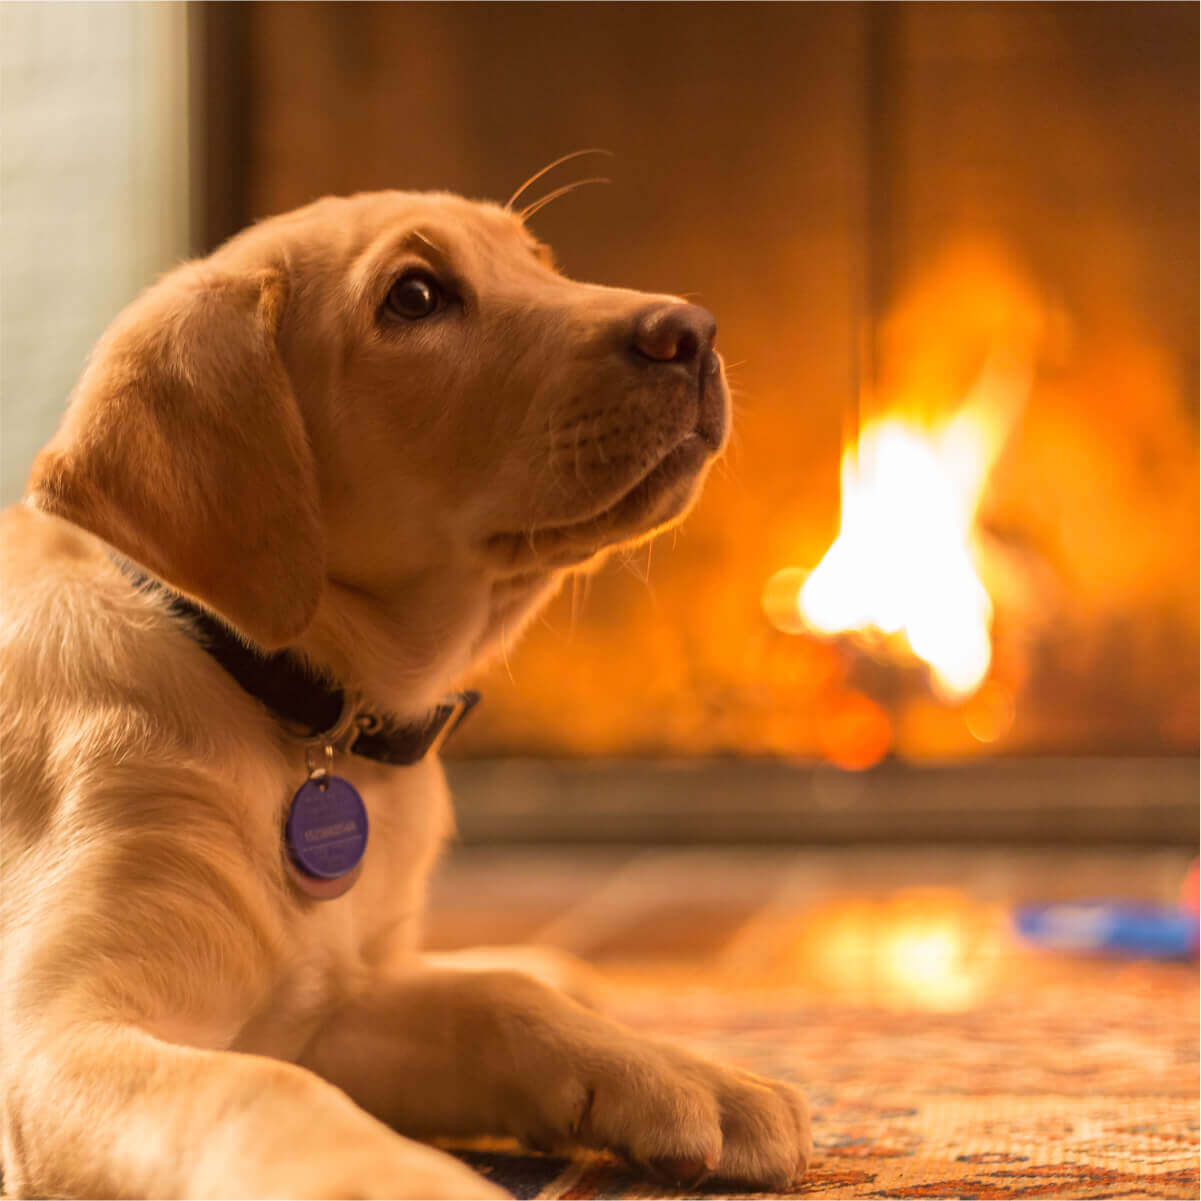 Space heaters and fires - A furry friend lounging on a rug, captivated by the crackling flames of a fireplace. The perfect spot for relaxation and warmth.